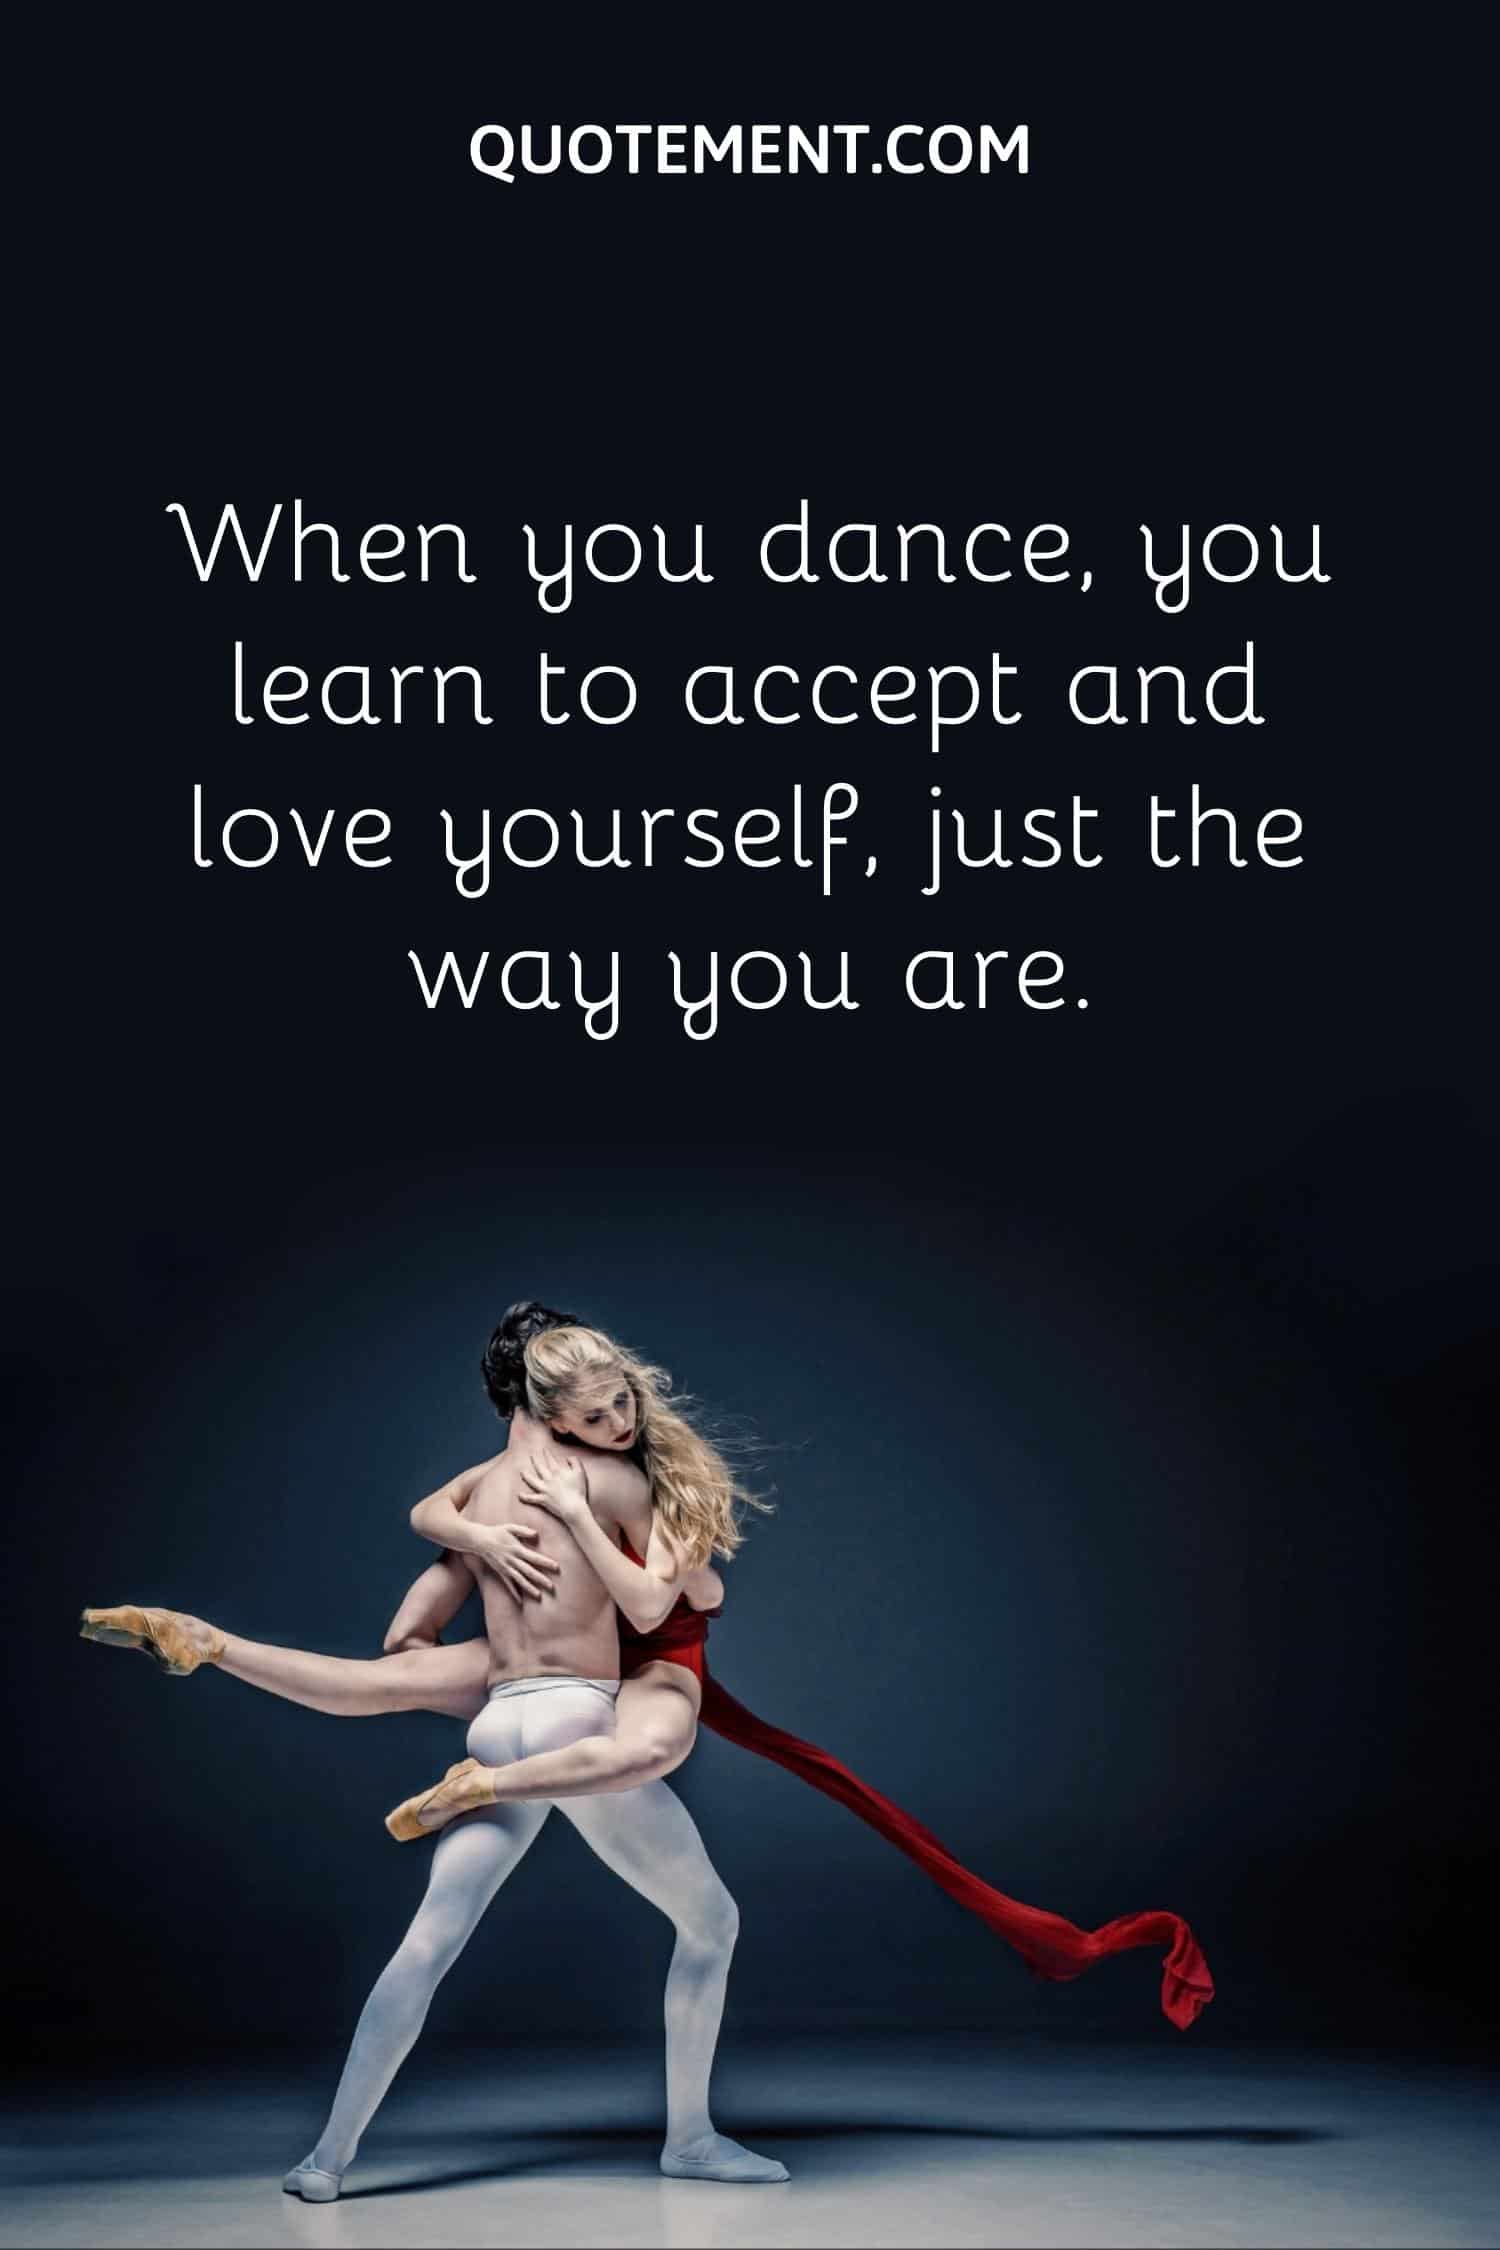 When you dance, you learn to accept and love yourself, just the way you are